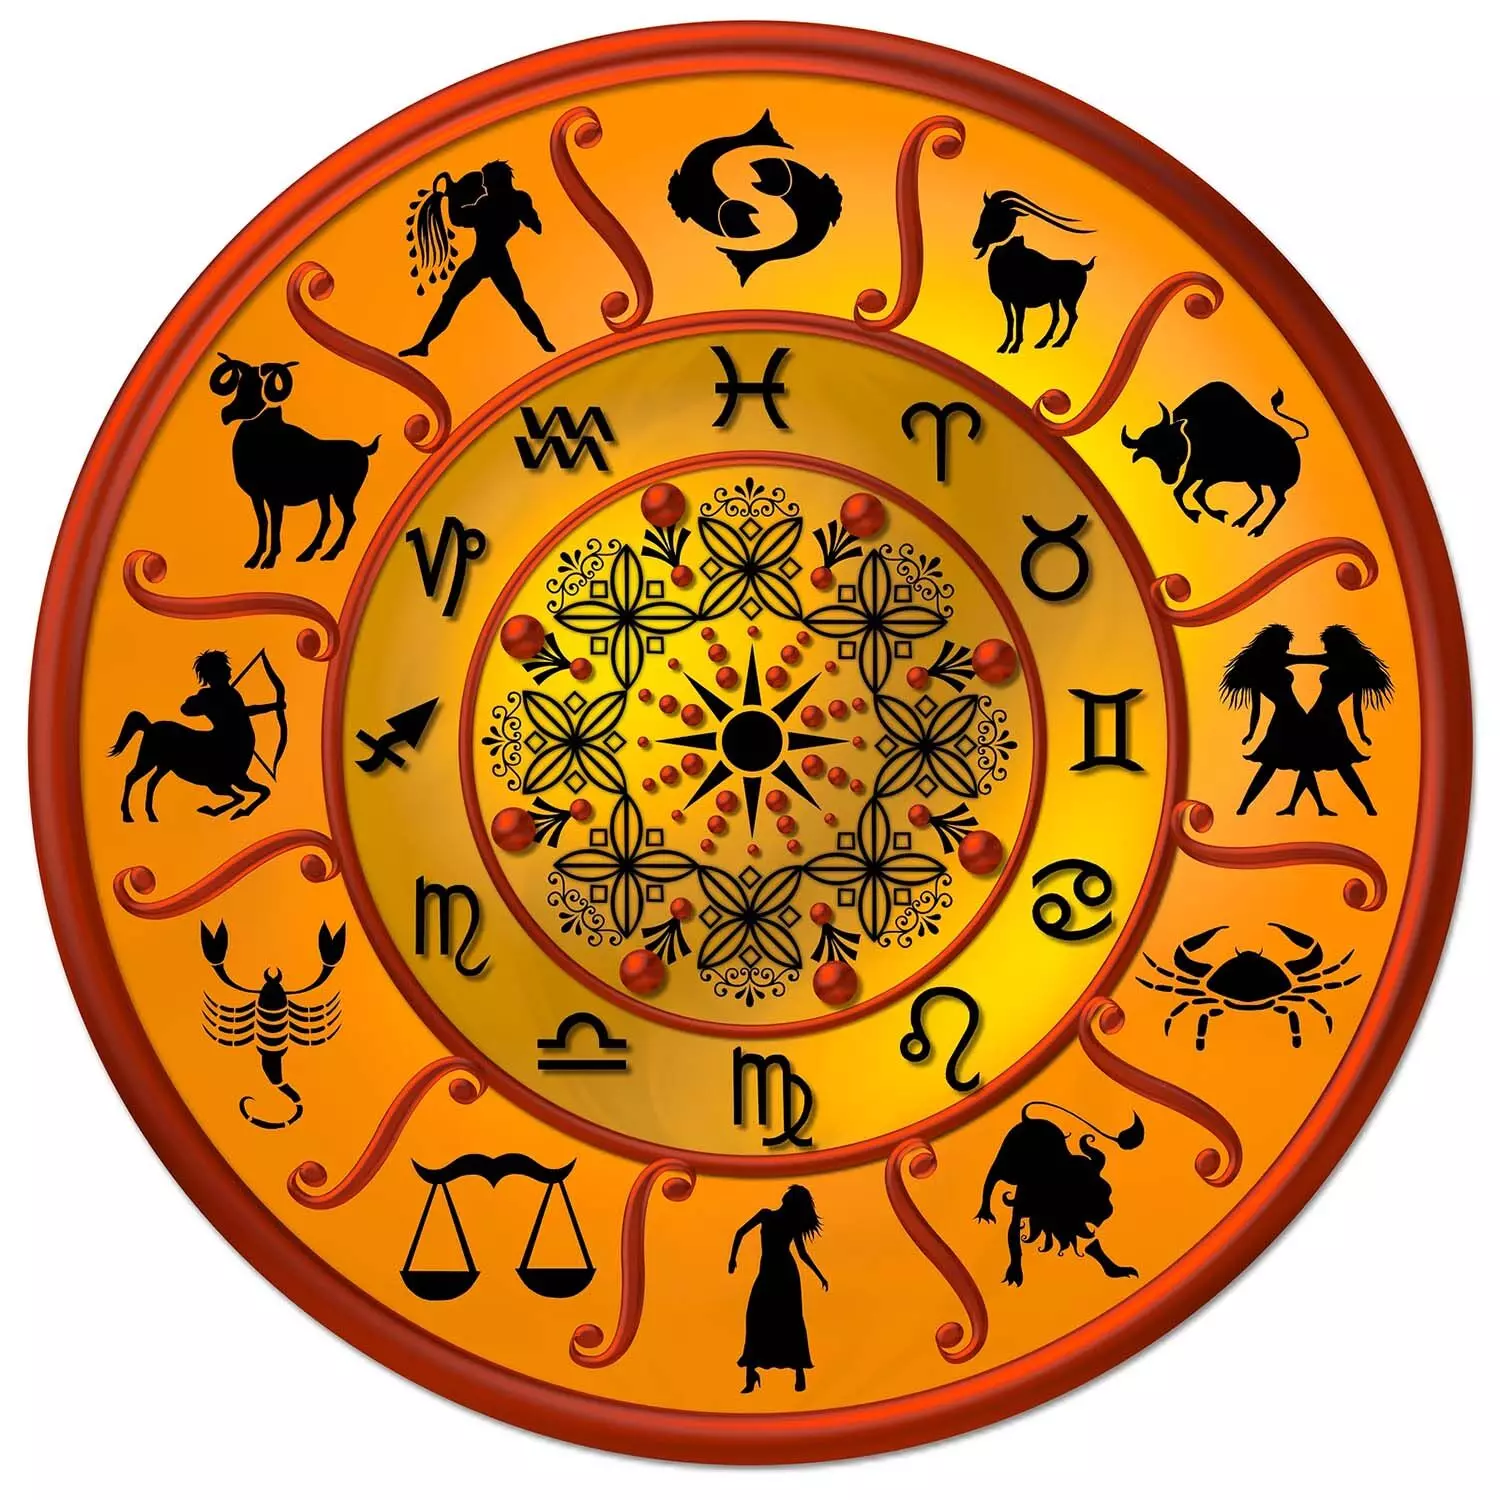 20 June – Know your todays horoscope